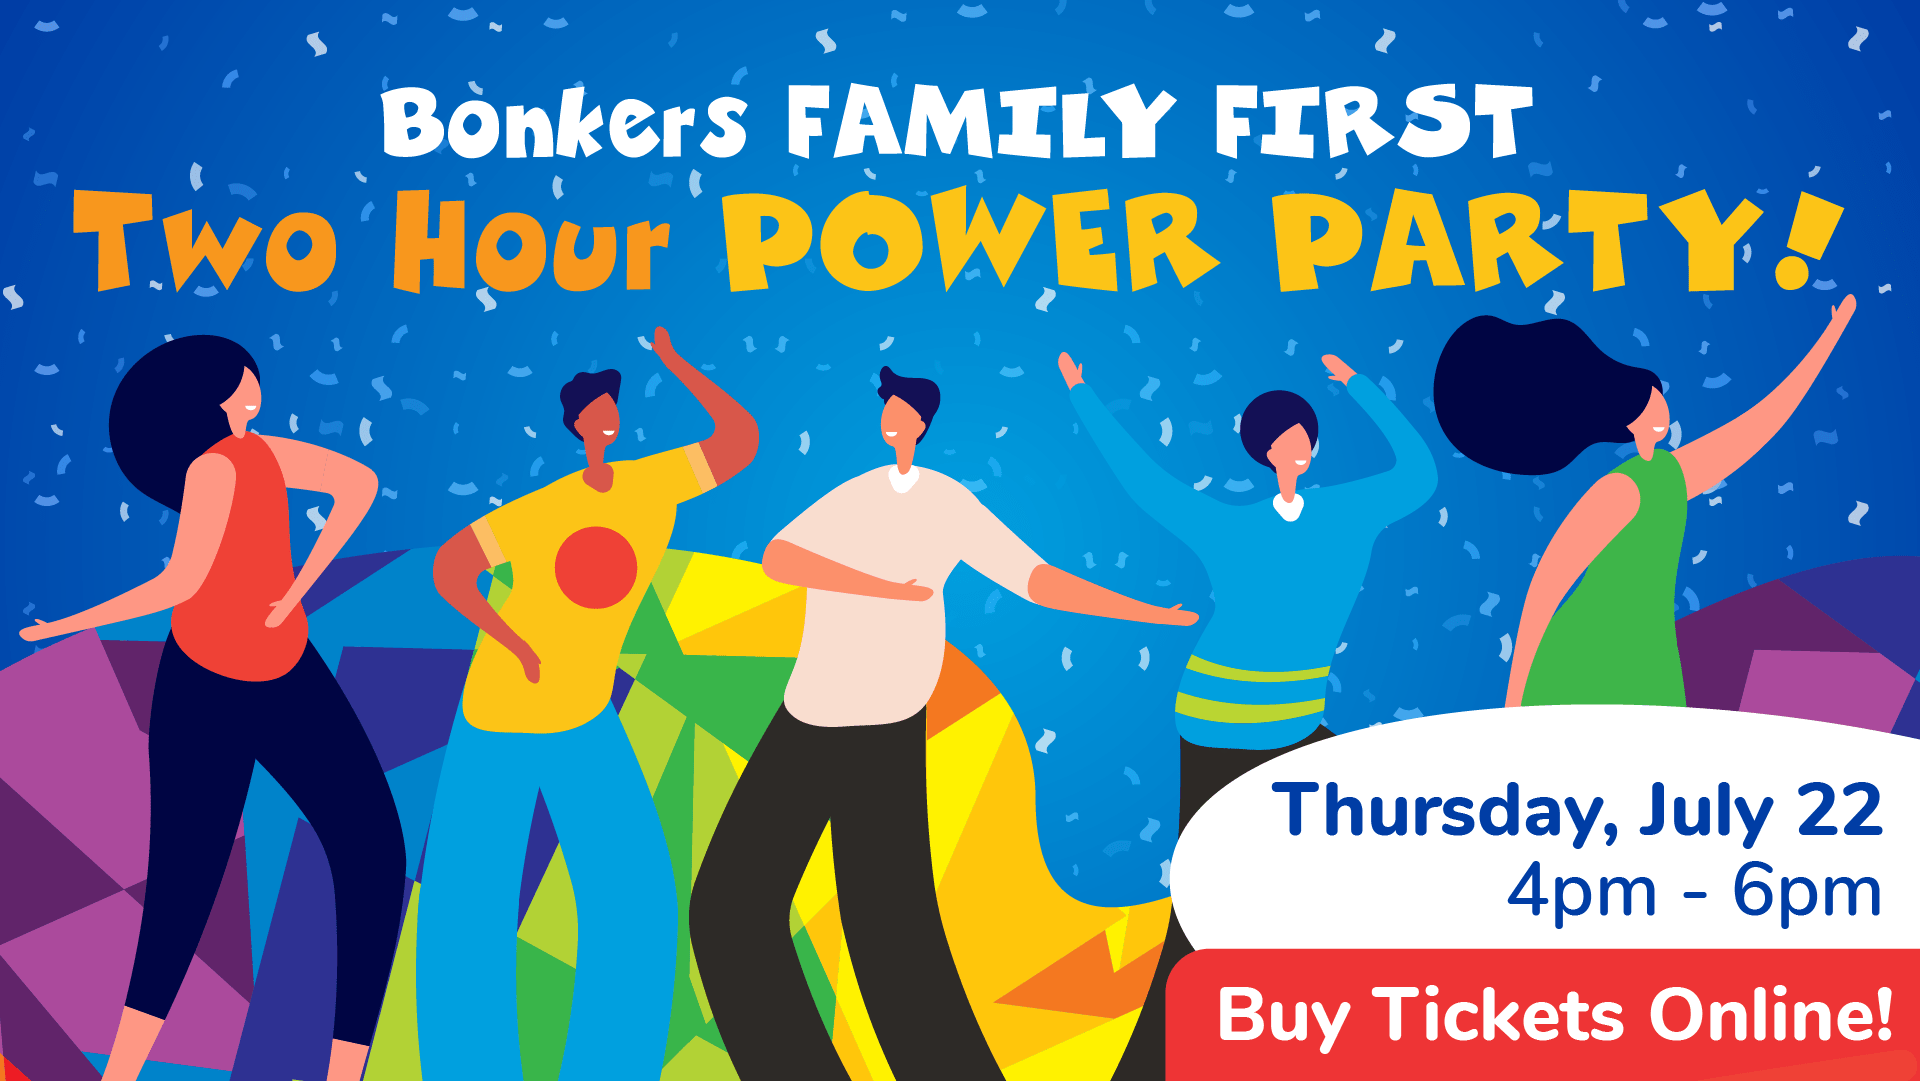 Two Hour POWER PARTY!